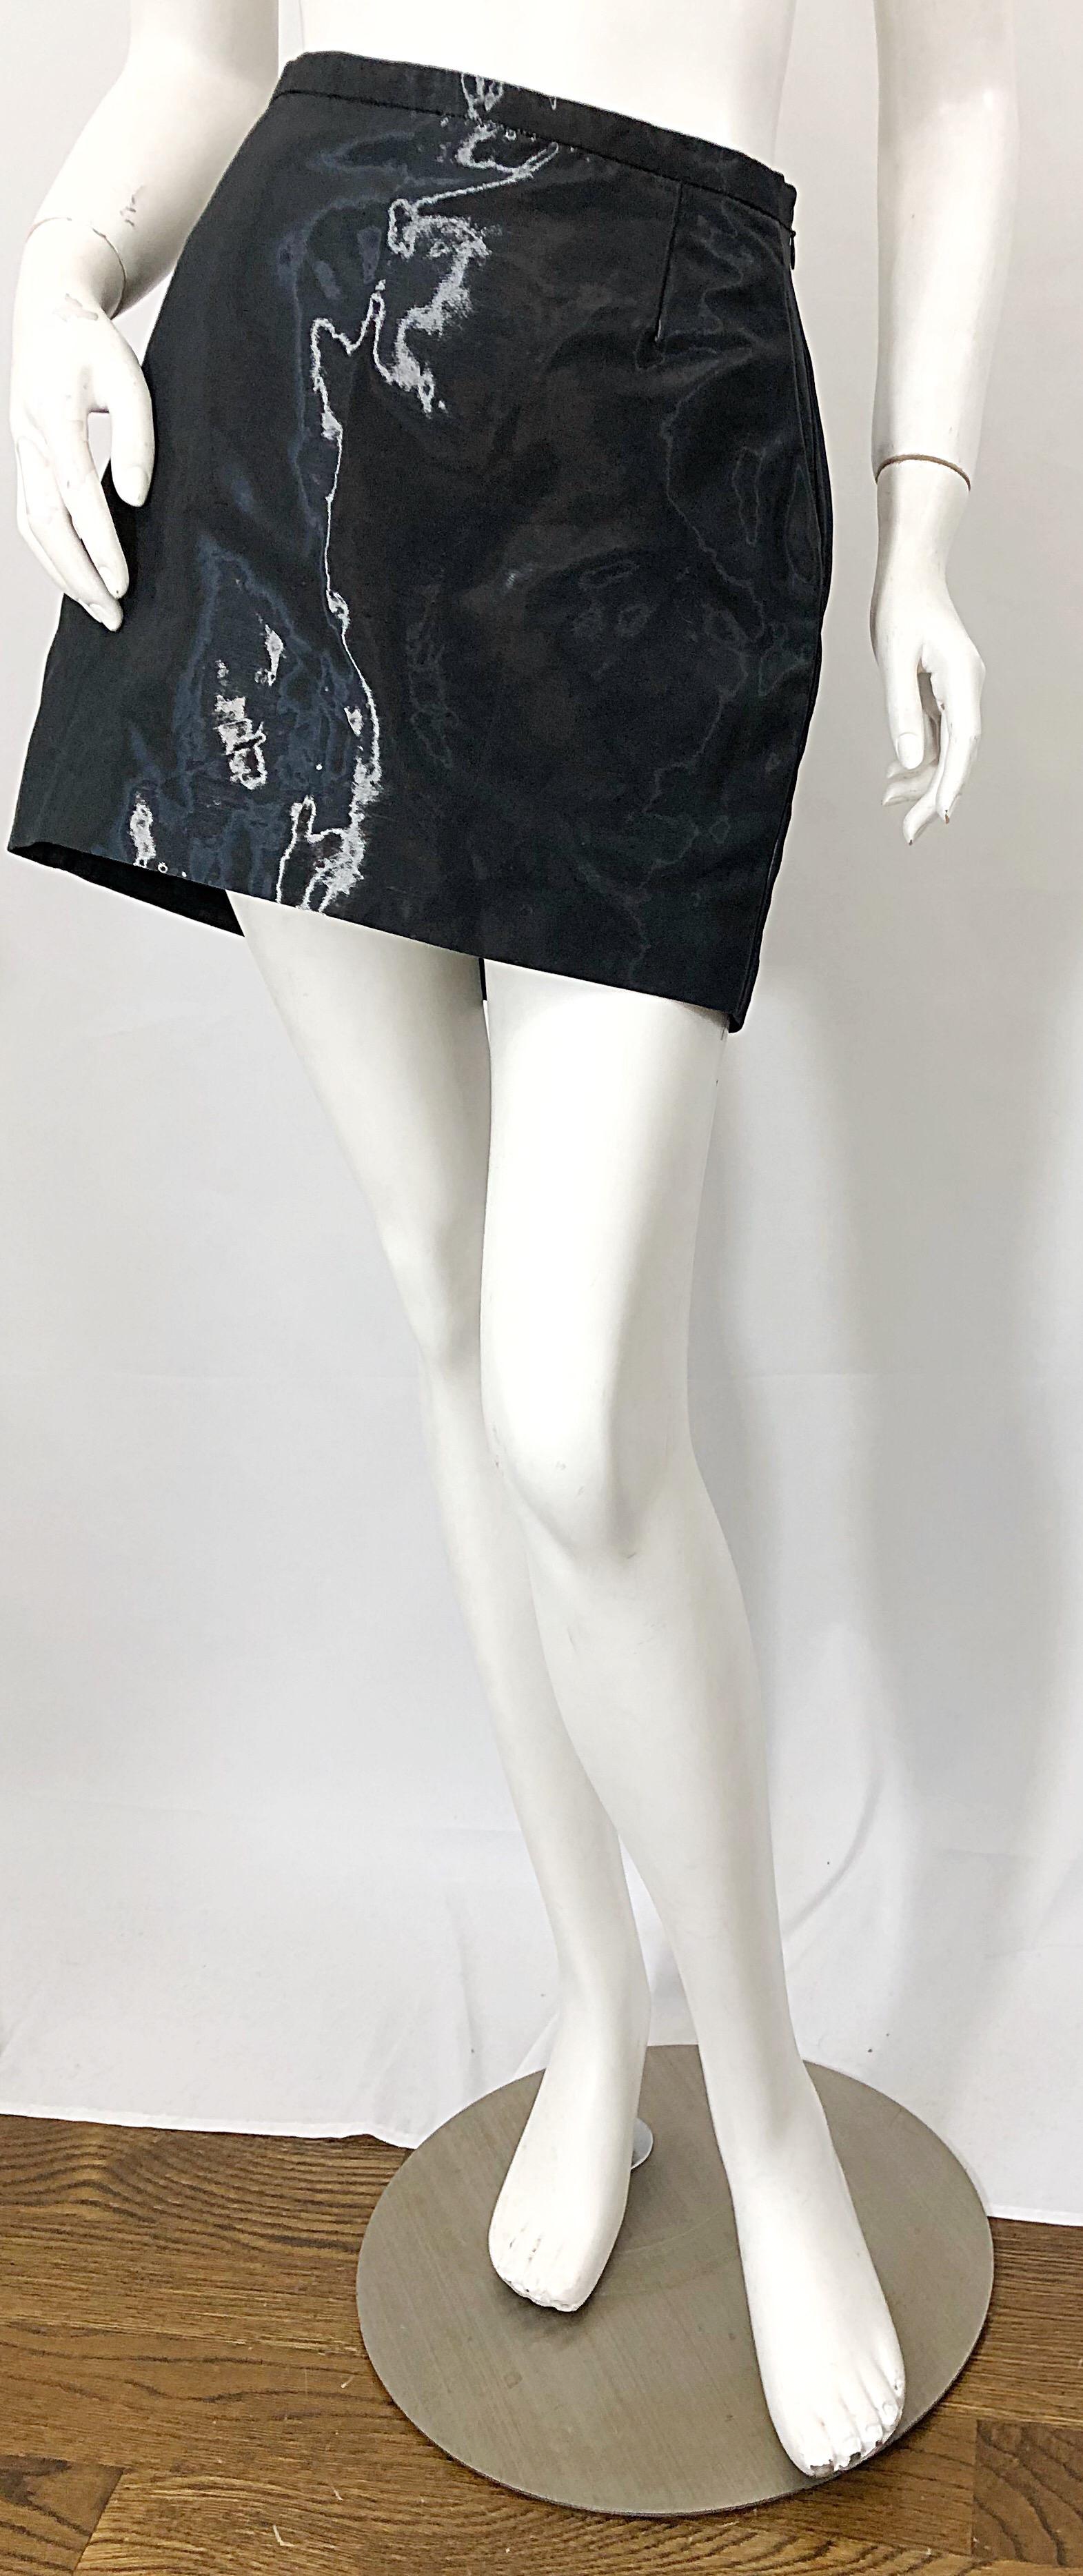 1990s JIL SANDER gray / black metallic minimalist mini skirt from her exclusive Tailor Made line. The line was considered a step up from Sander's already luxury main line. This skirt isn't just your basic mini skirt; it takes on a different sheen /